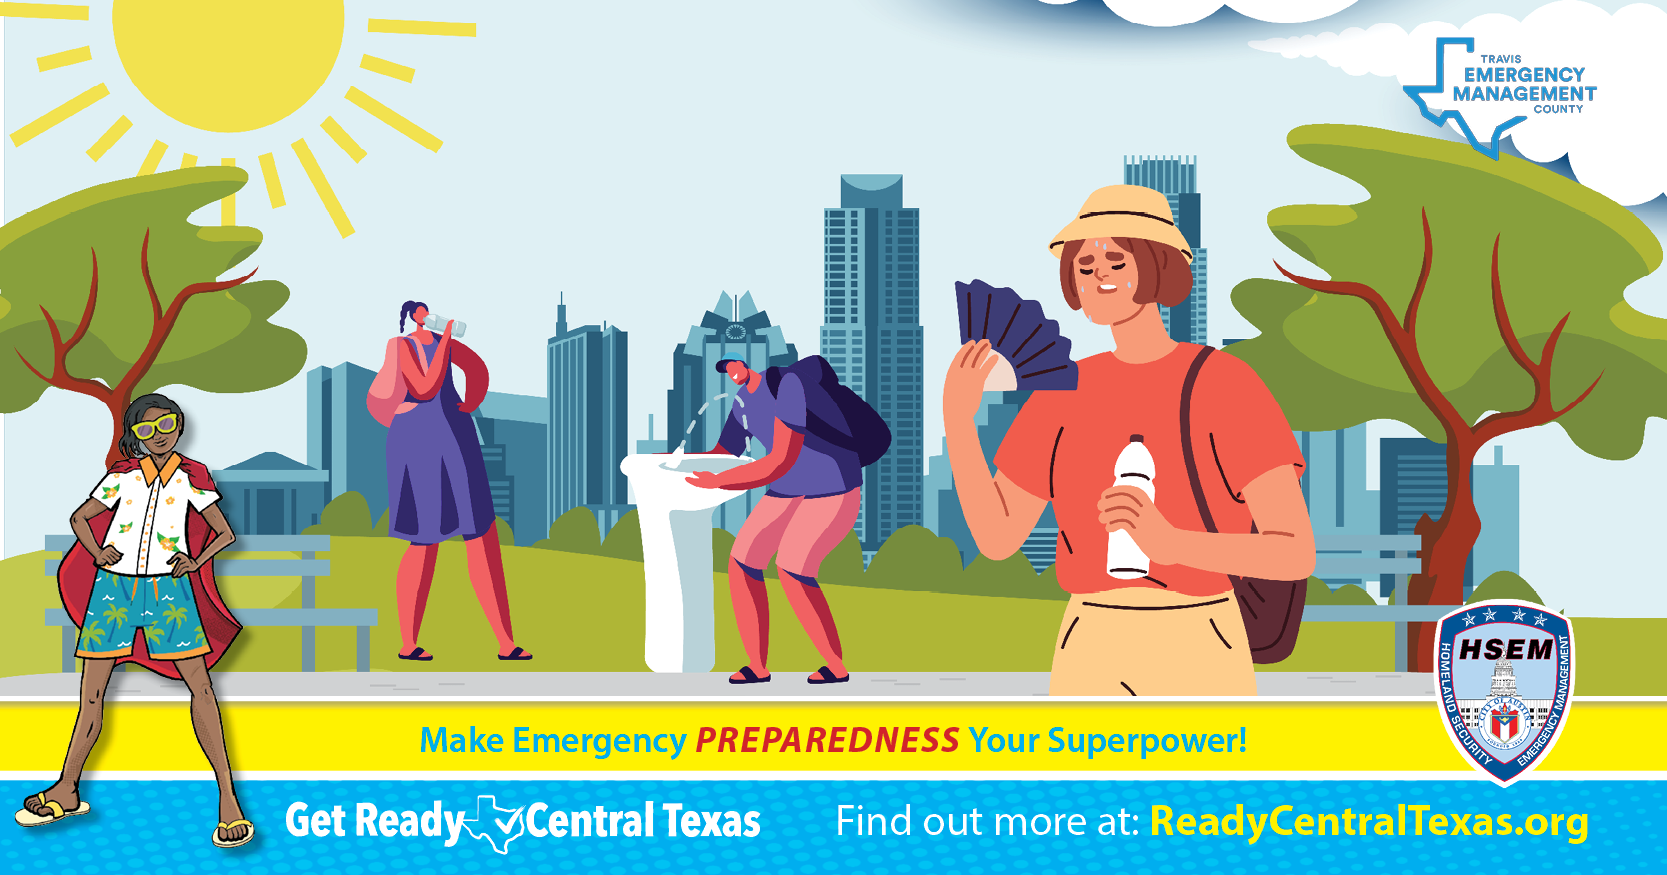 cartoon style image of 3 people walking at the park on a sunny day with Austin skyline in background. Two are drinking water. One is fanning herself. Superhero wearing flipflops in the foreground.   Text on image: Make Emergency Preparedness Your Superpower! Find out more at ReadyCentralTexas.org 